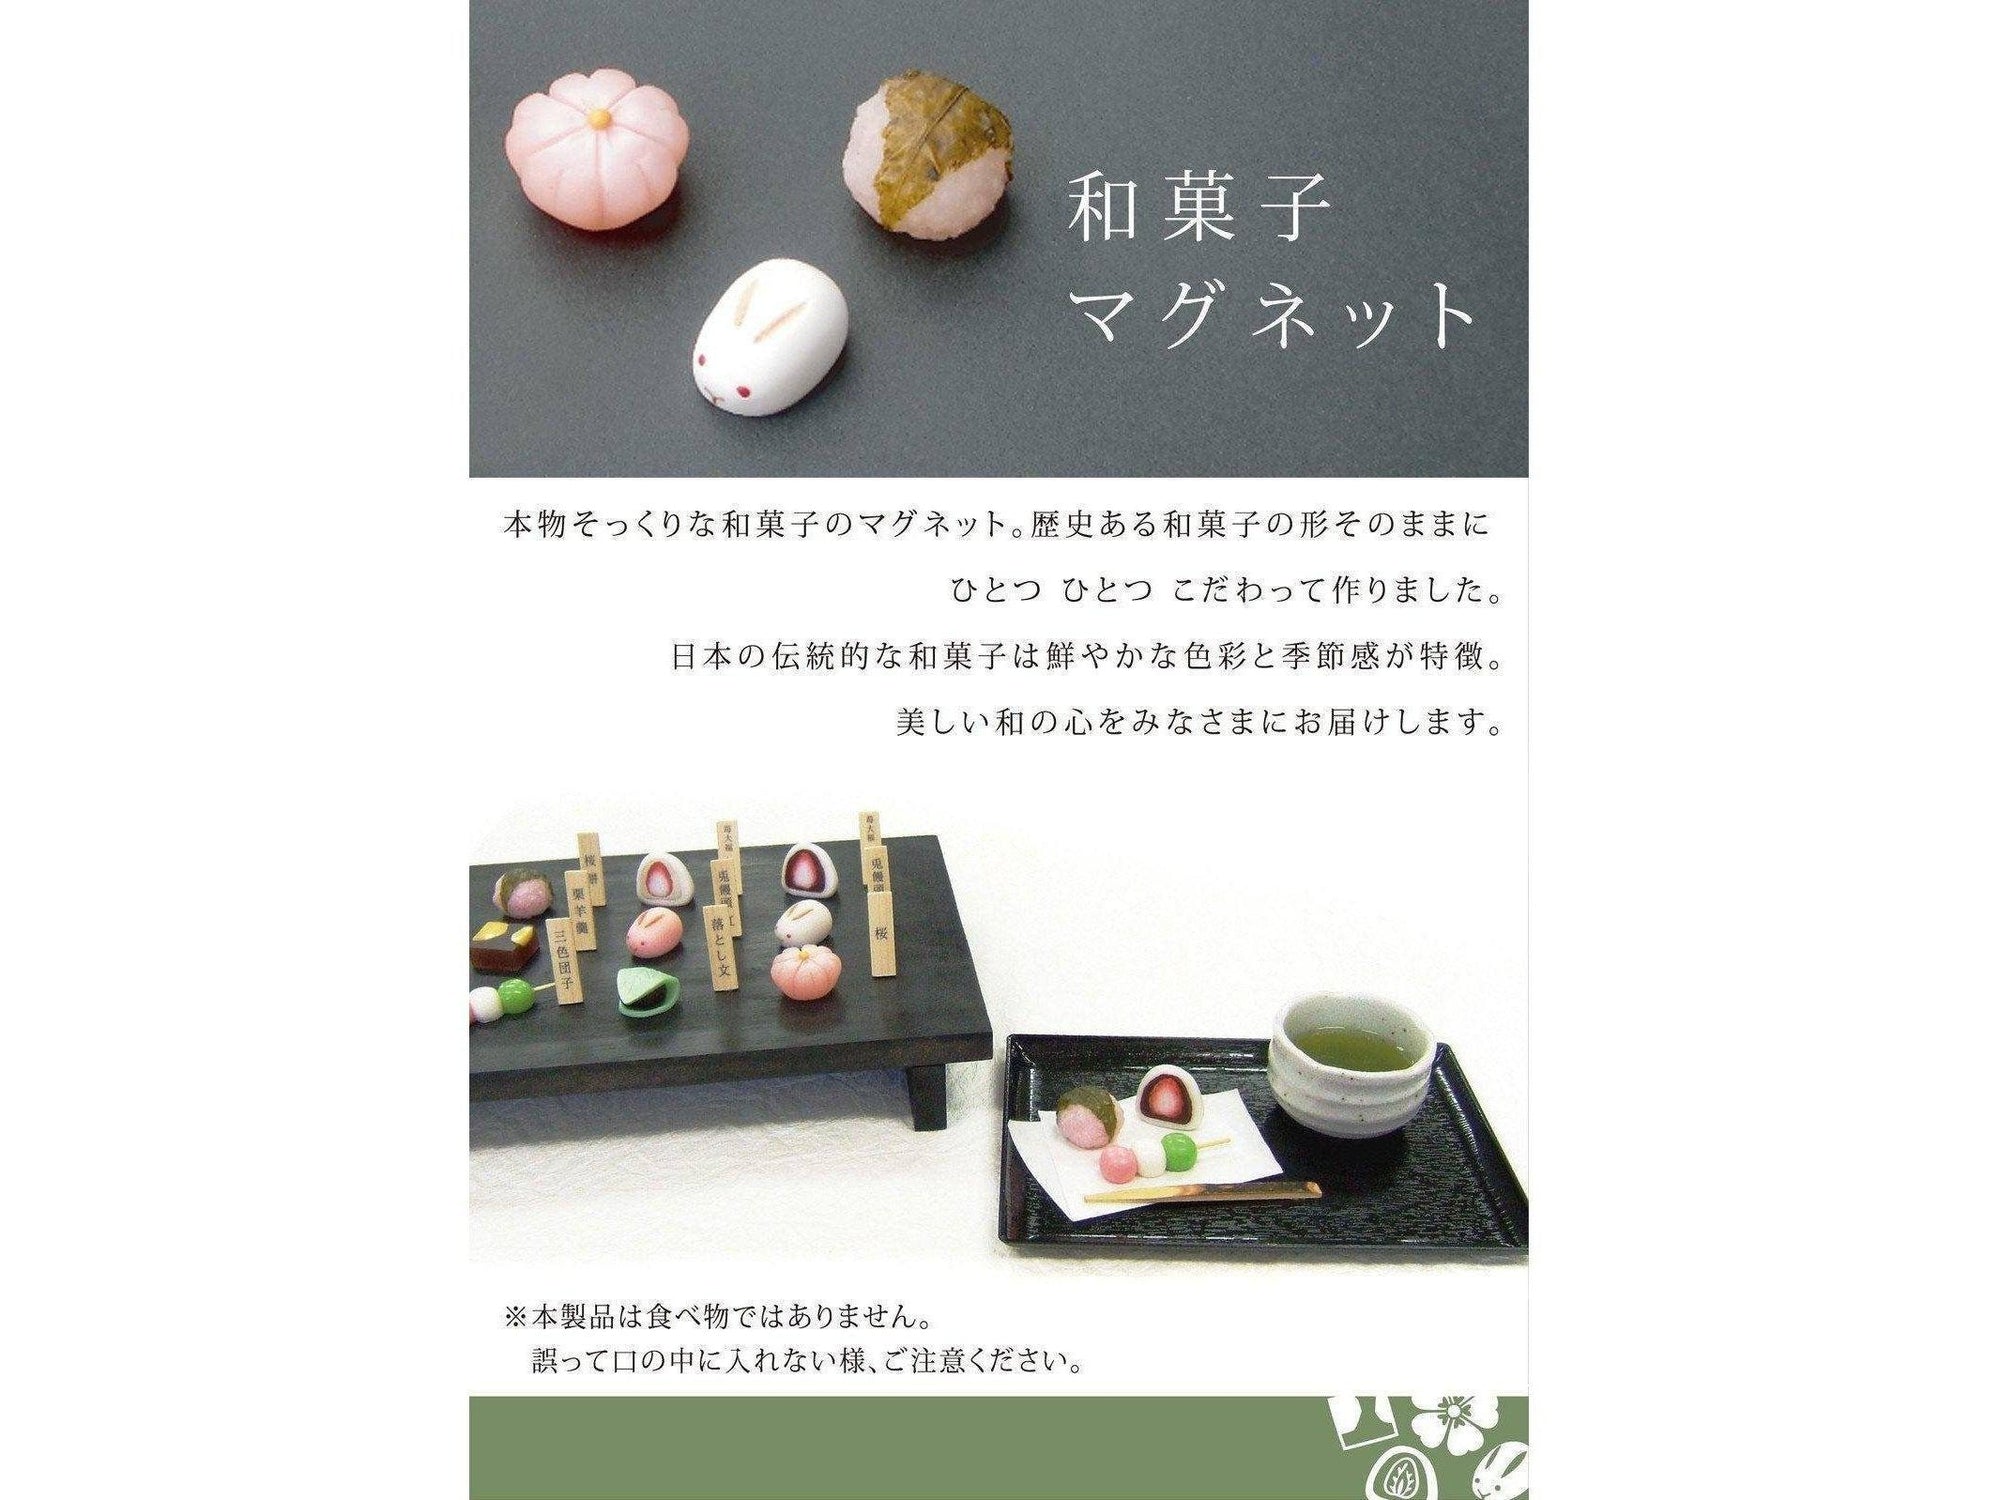 Wagashi Drooping Leaf Magnet